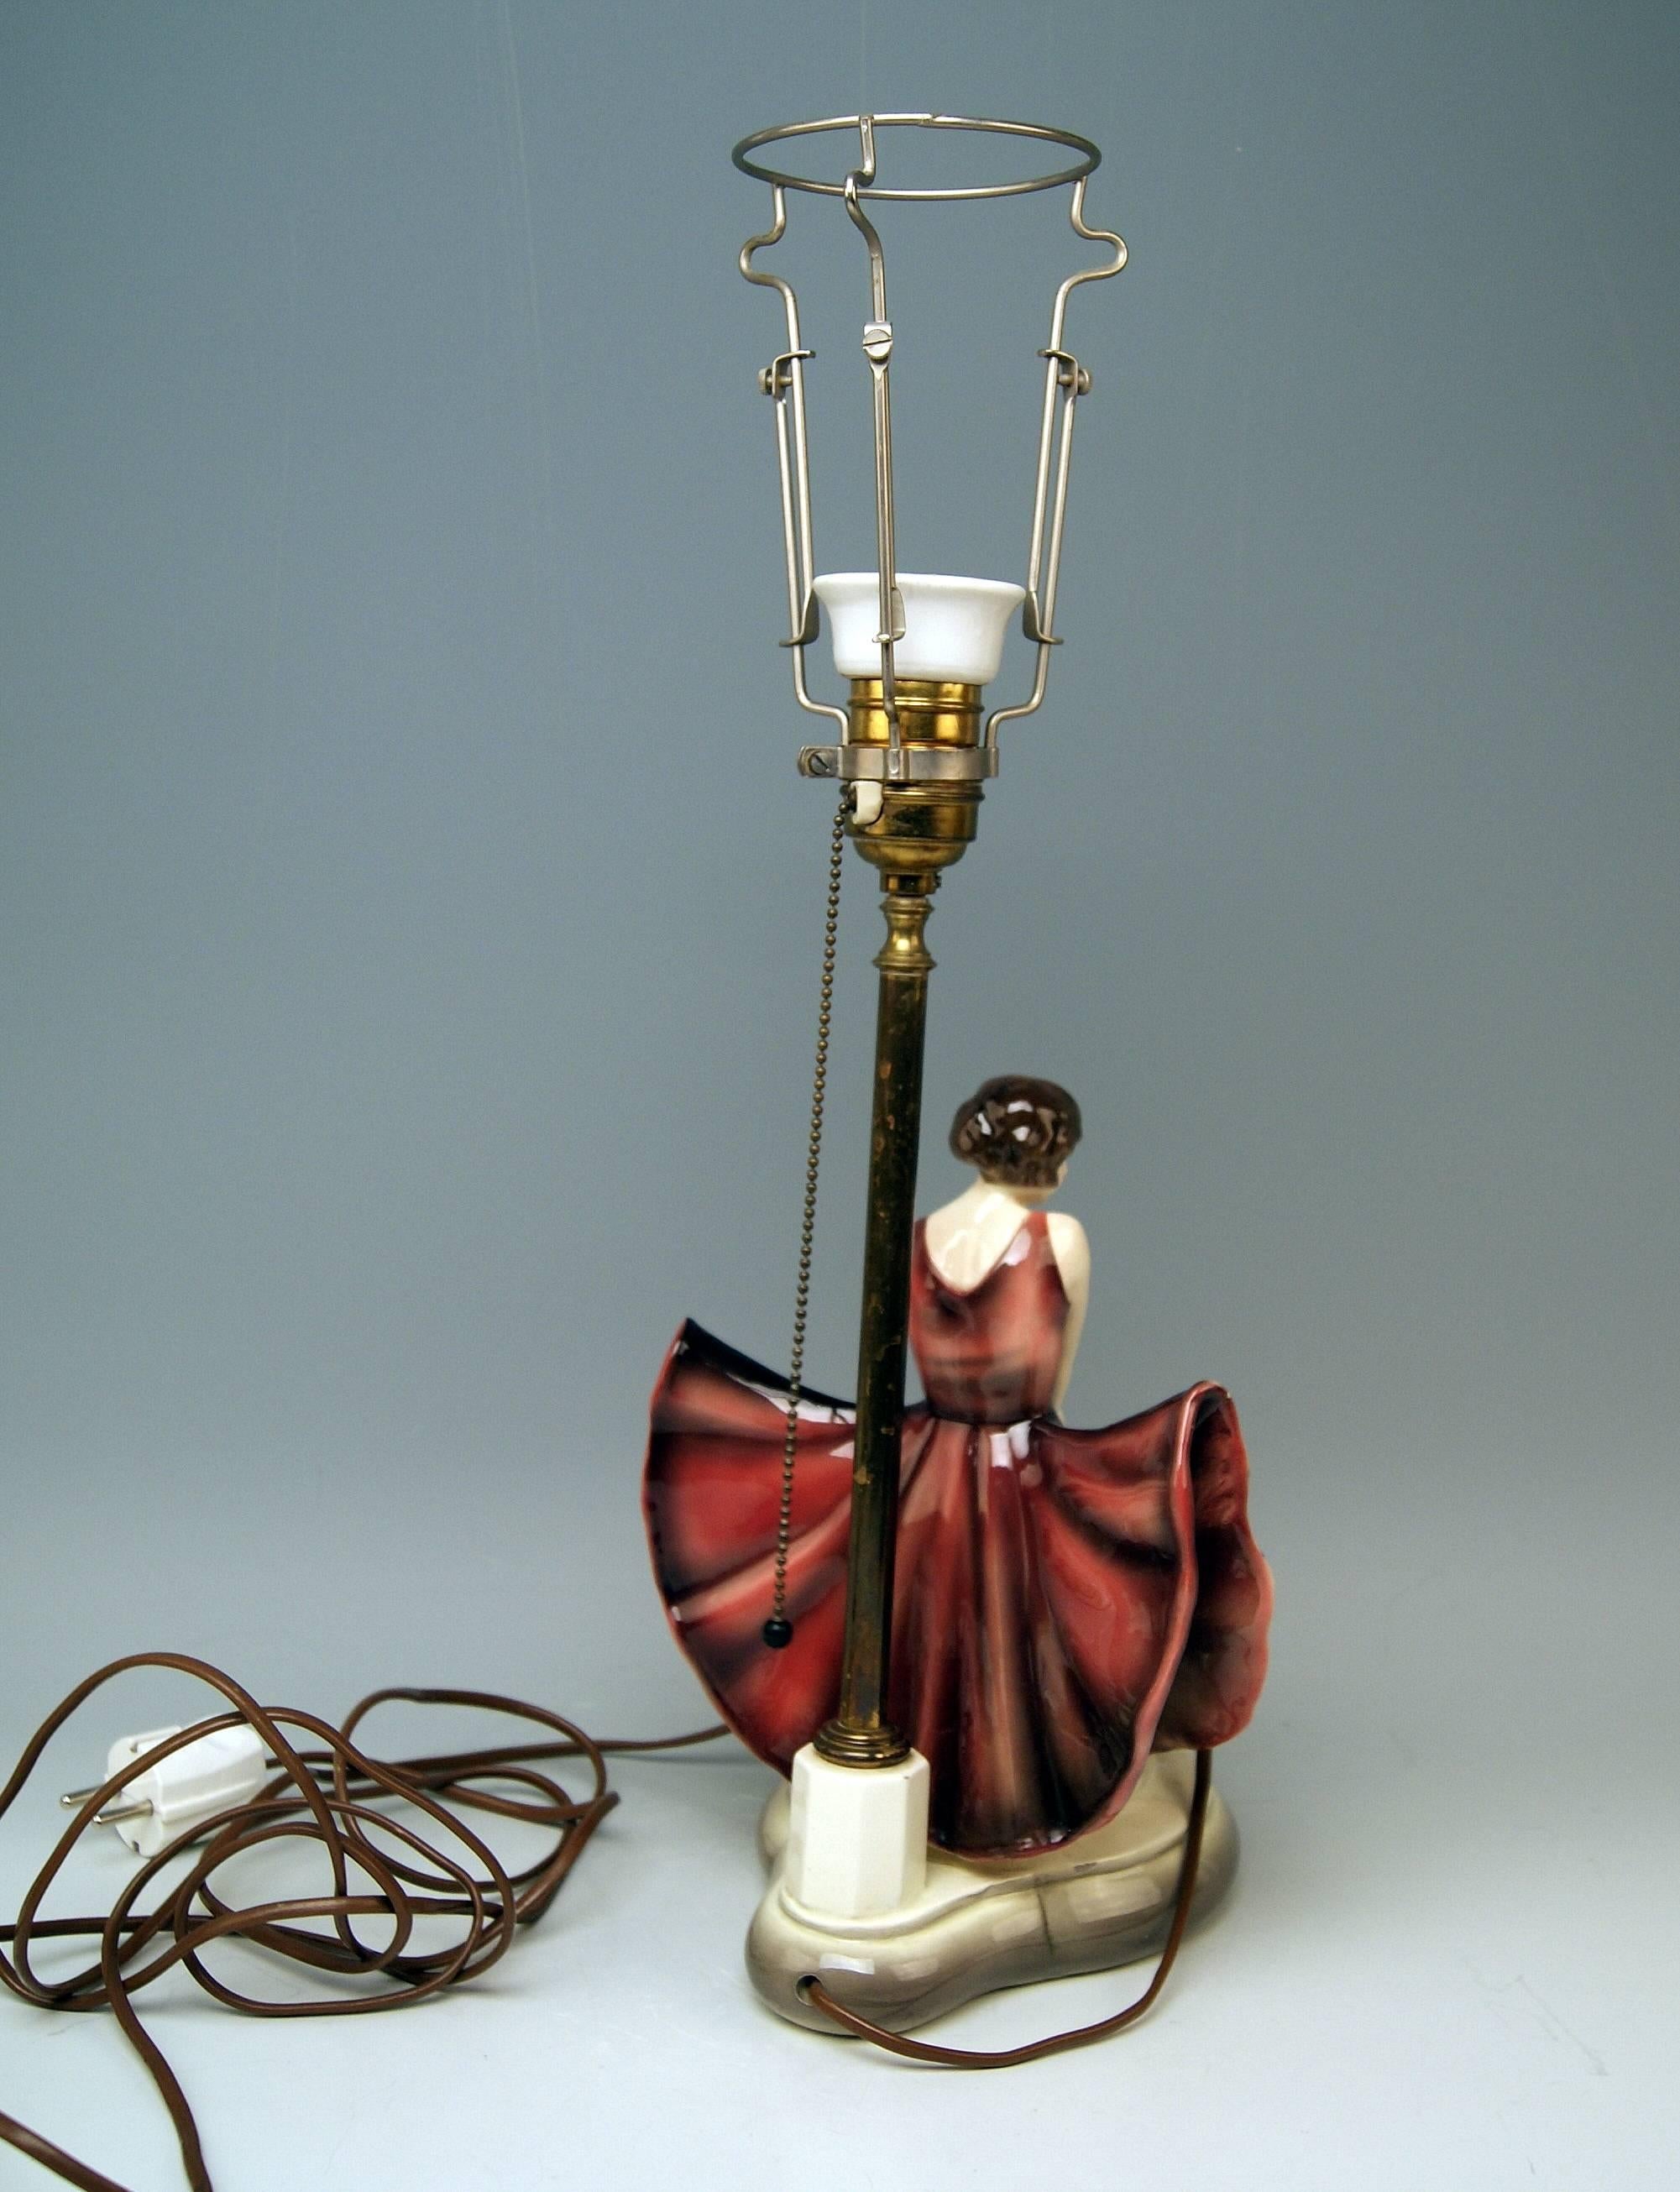 lady figurine table lamps